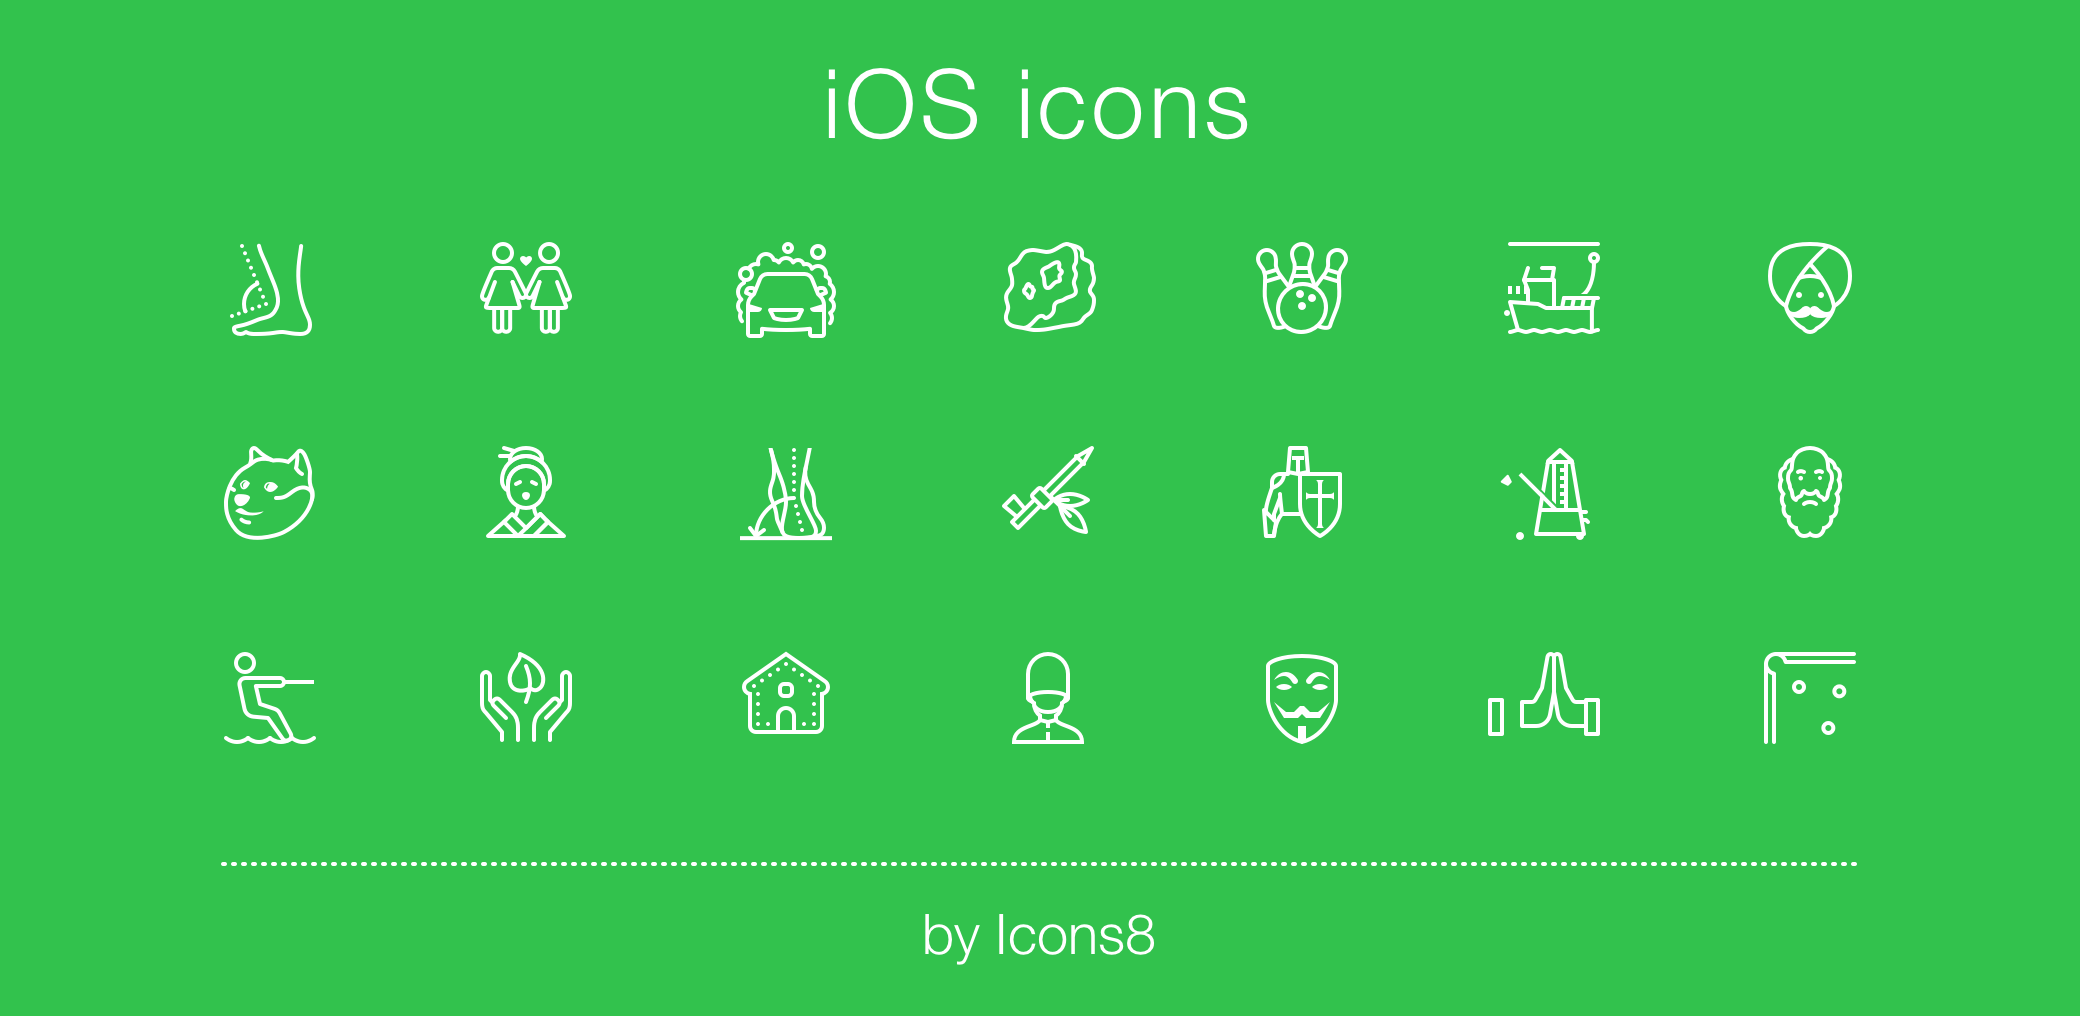 ios 7 icons for mac